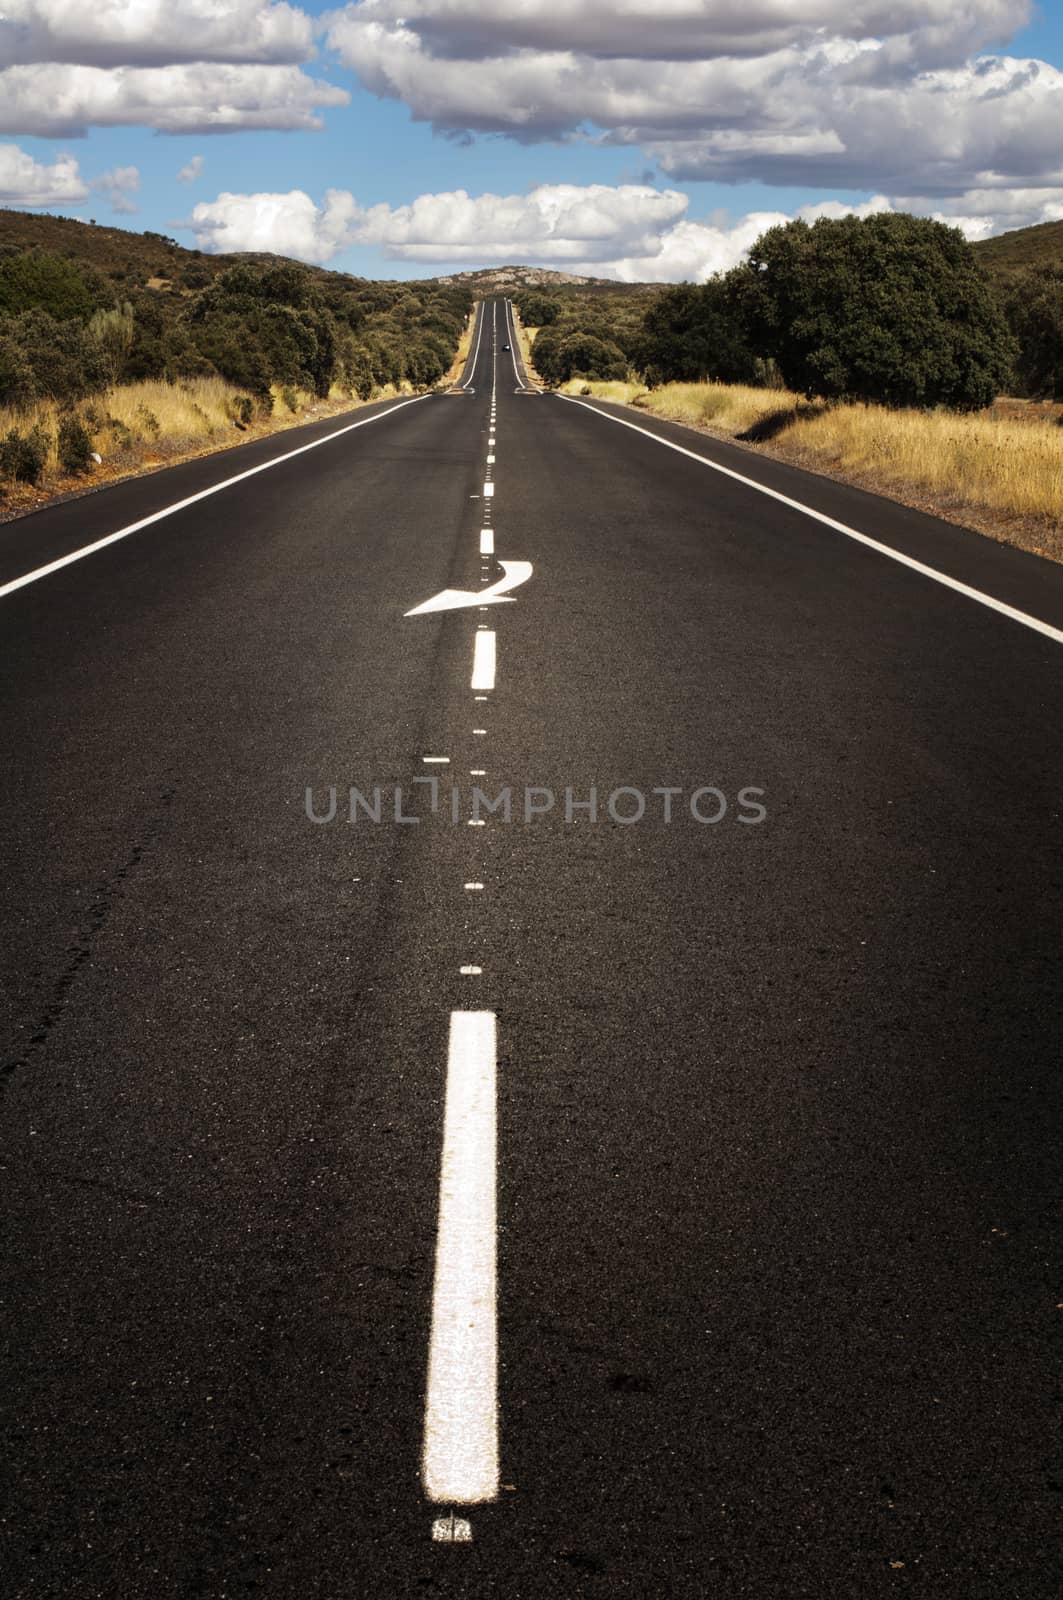 Asphalt road and white line marking. Close up low viewpoint.